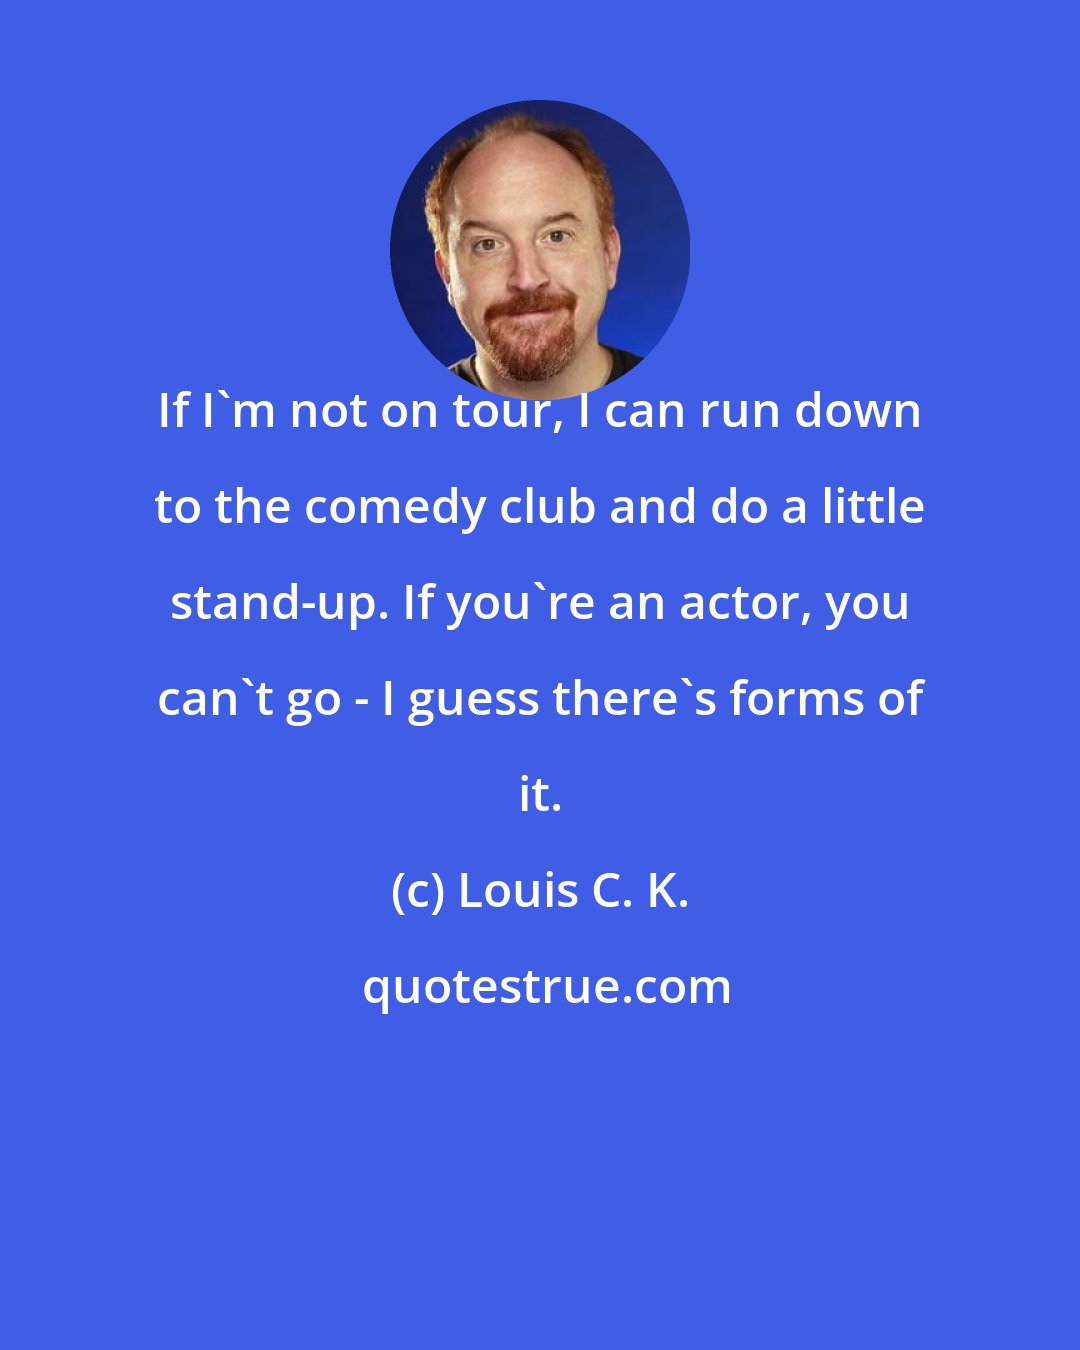 Louis C. K.: If I'm not on tour, I can run down to the comedy club and do a little stand-up. If you're an actor, you can't go - I guess there's forms of it.